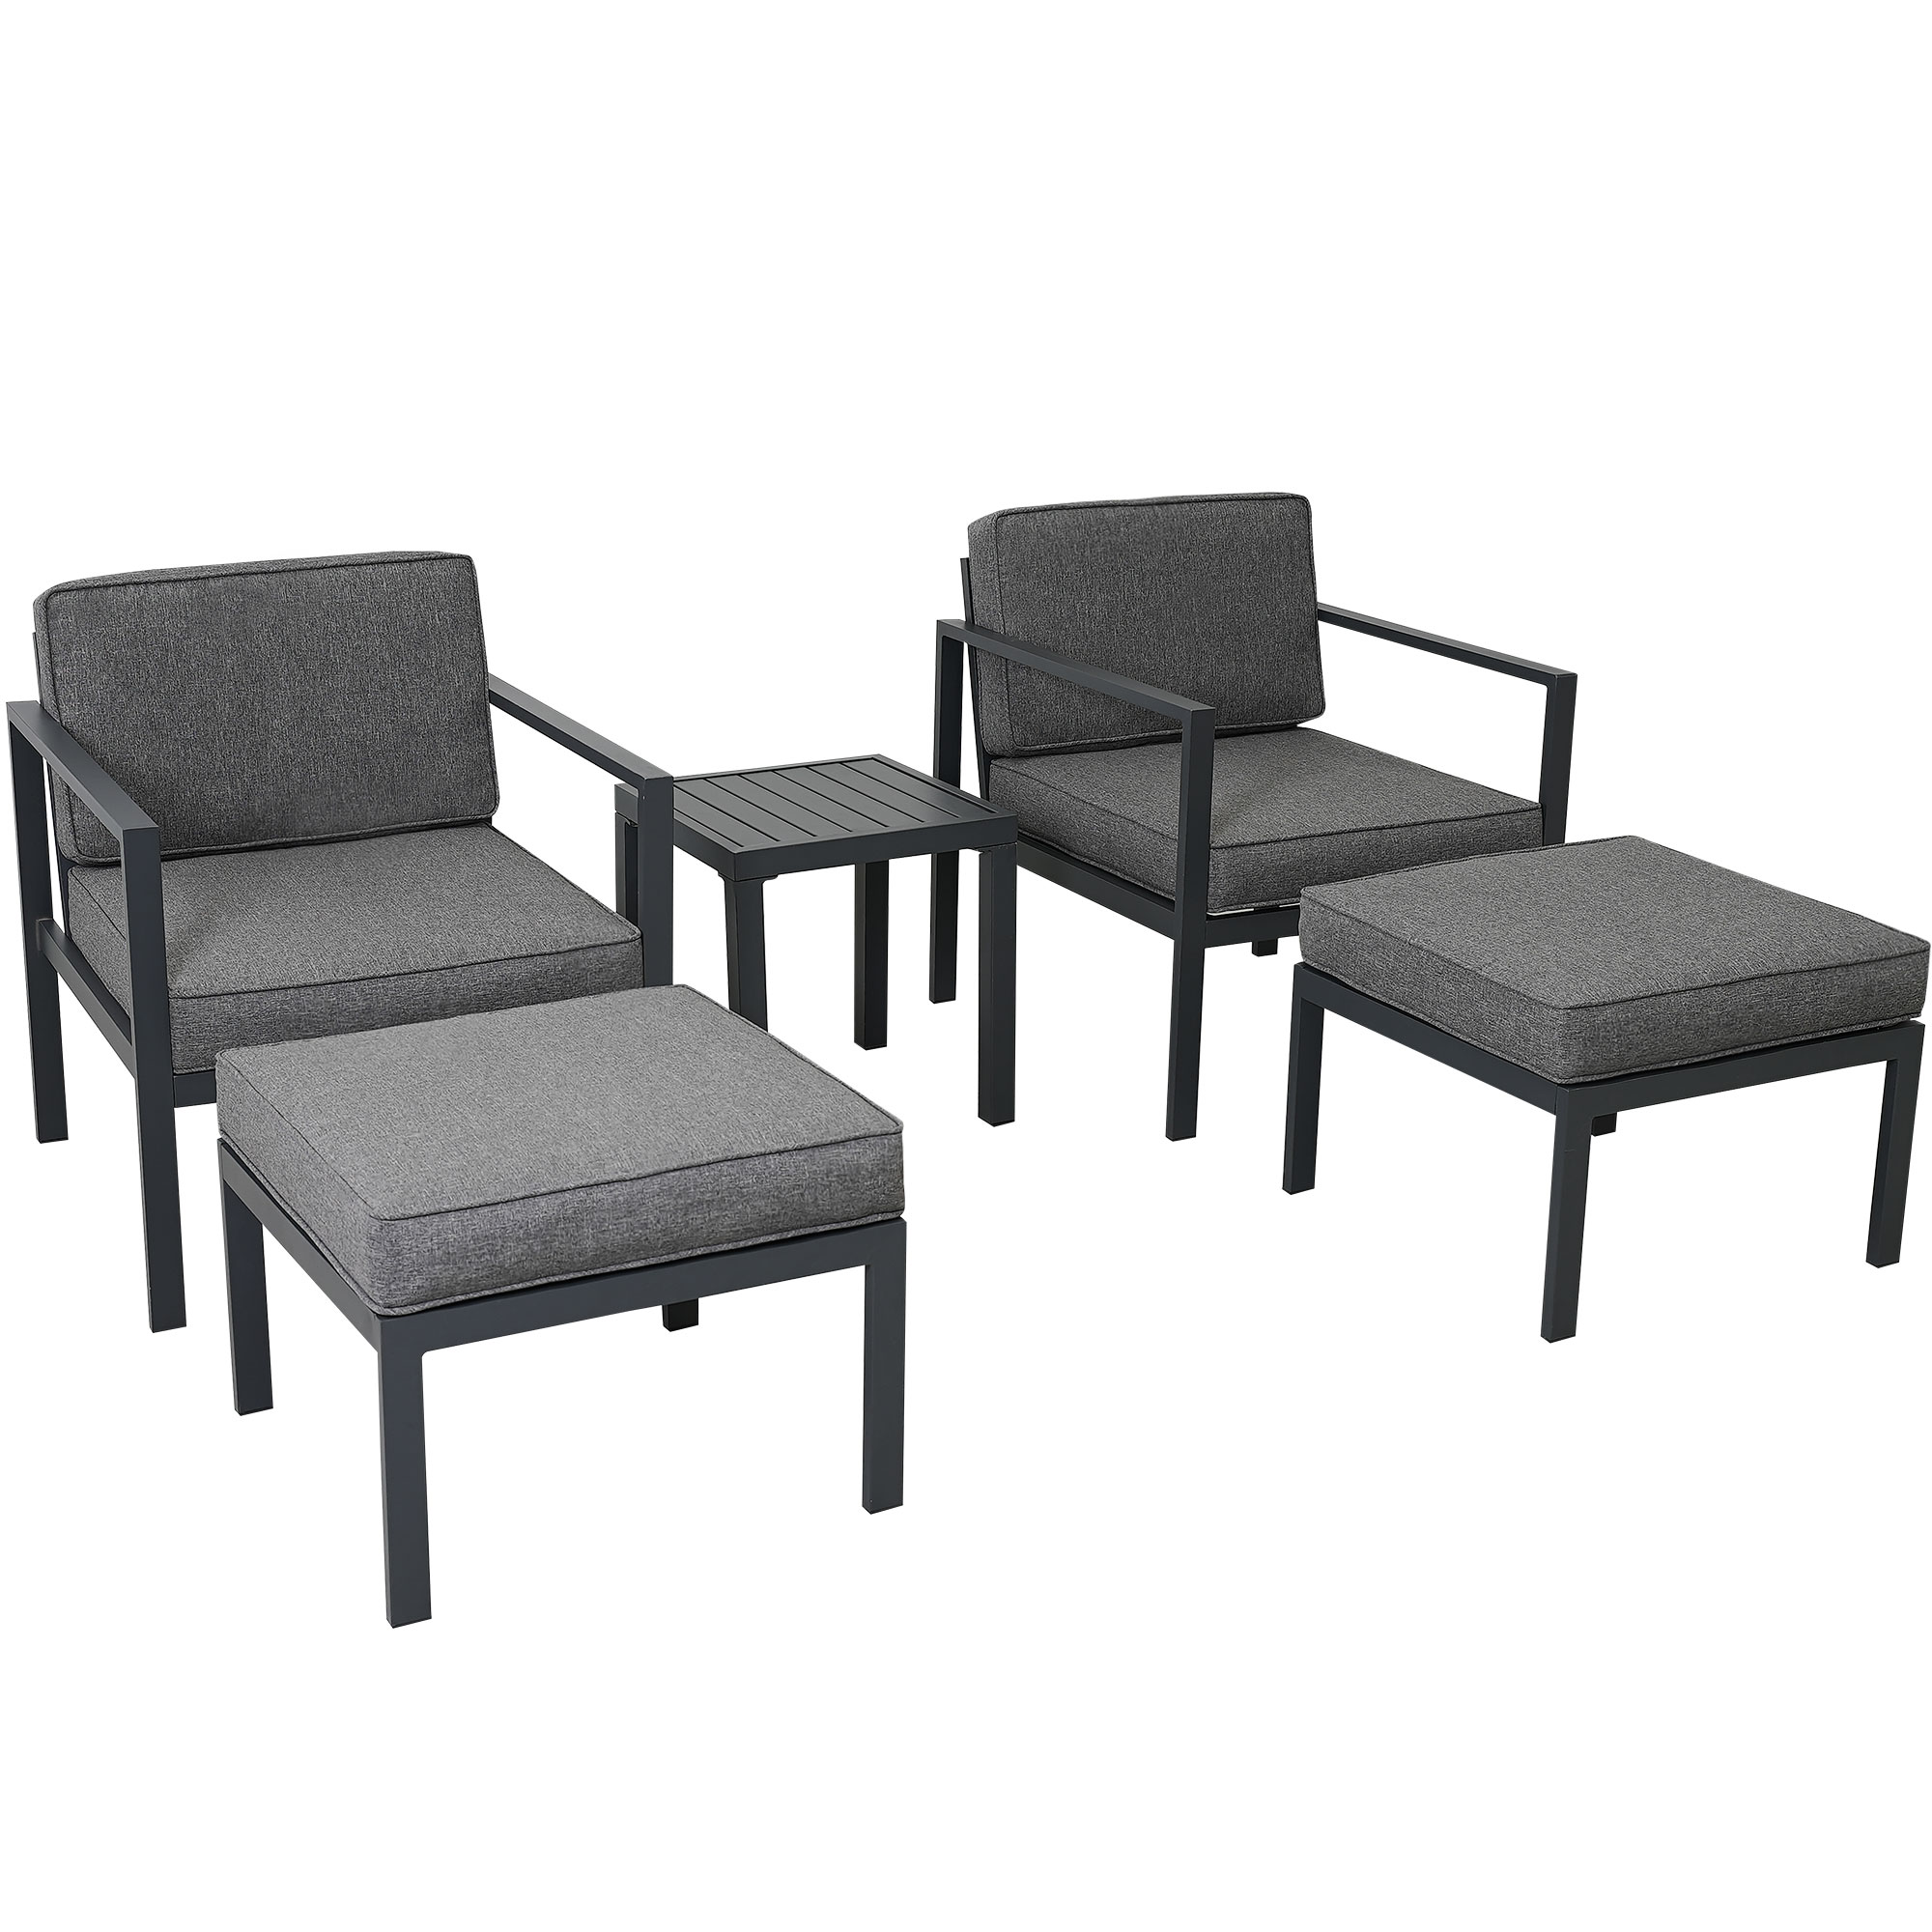 Mondawe Outdoor Patio 5-piece Aluminum Alloy Conversation Set Sofa Set with Coffee Table and Stools for Poolside Garden Black Frame+Gray Cushion-Mondawe